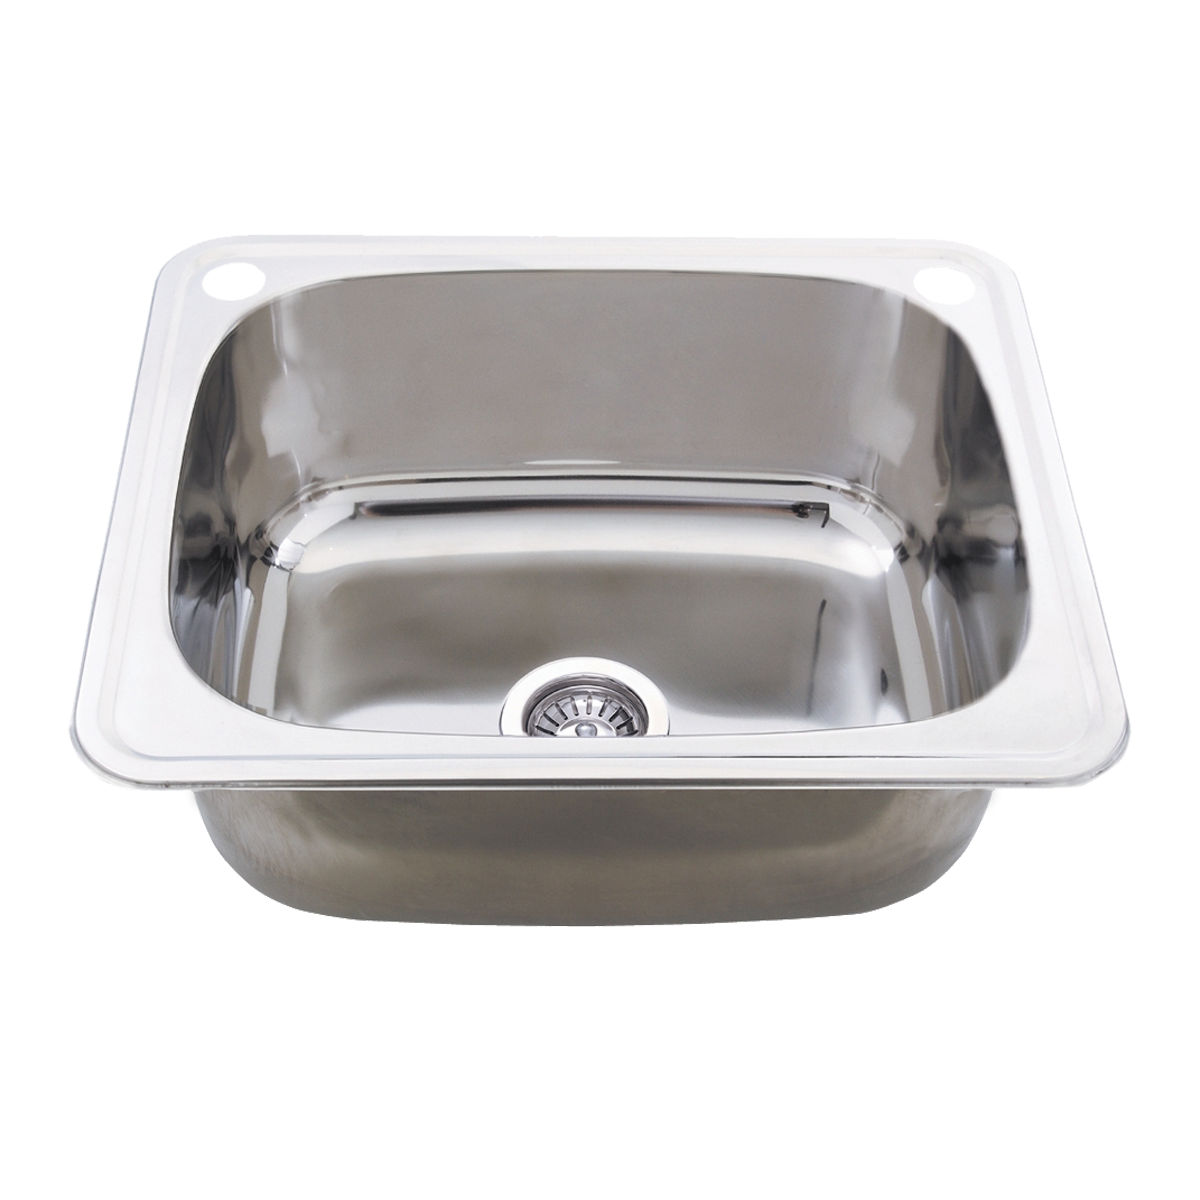 Everhard Classic 35L 2TH Utility Sink